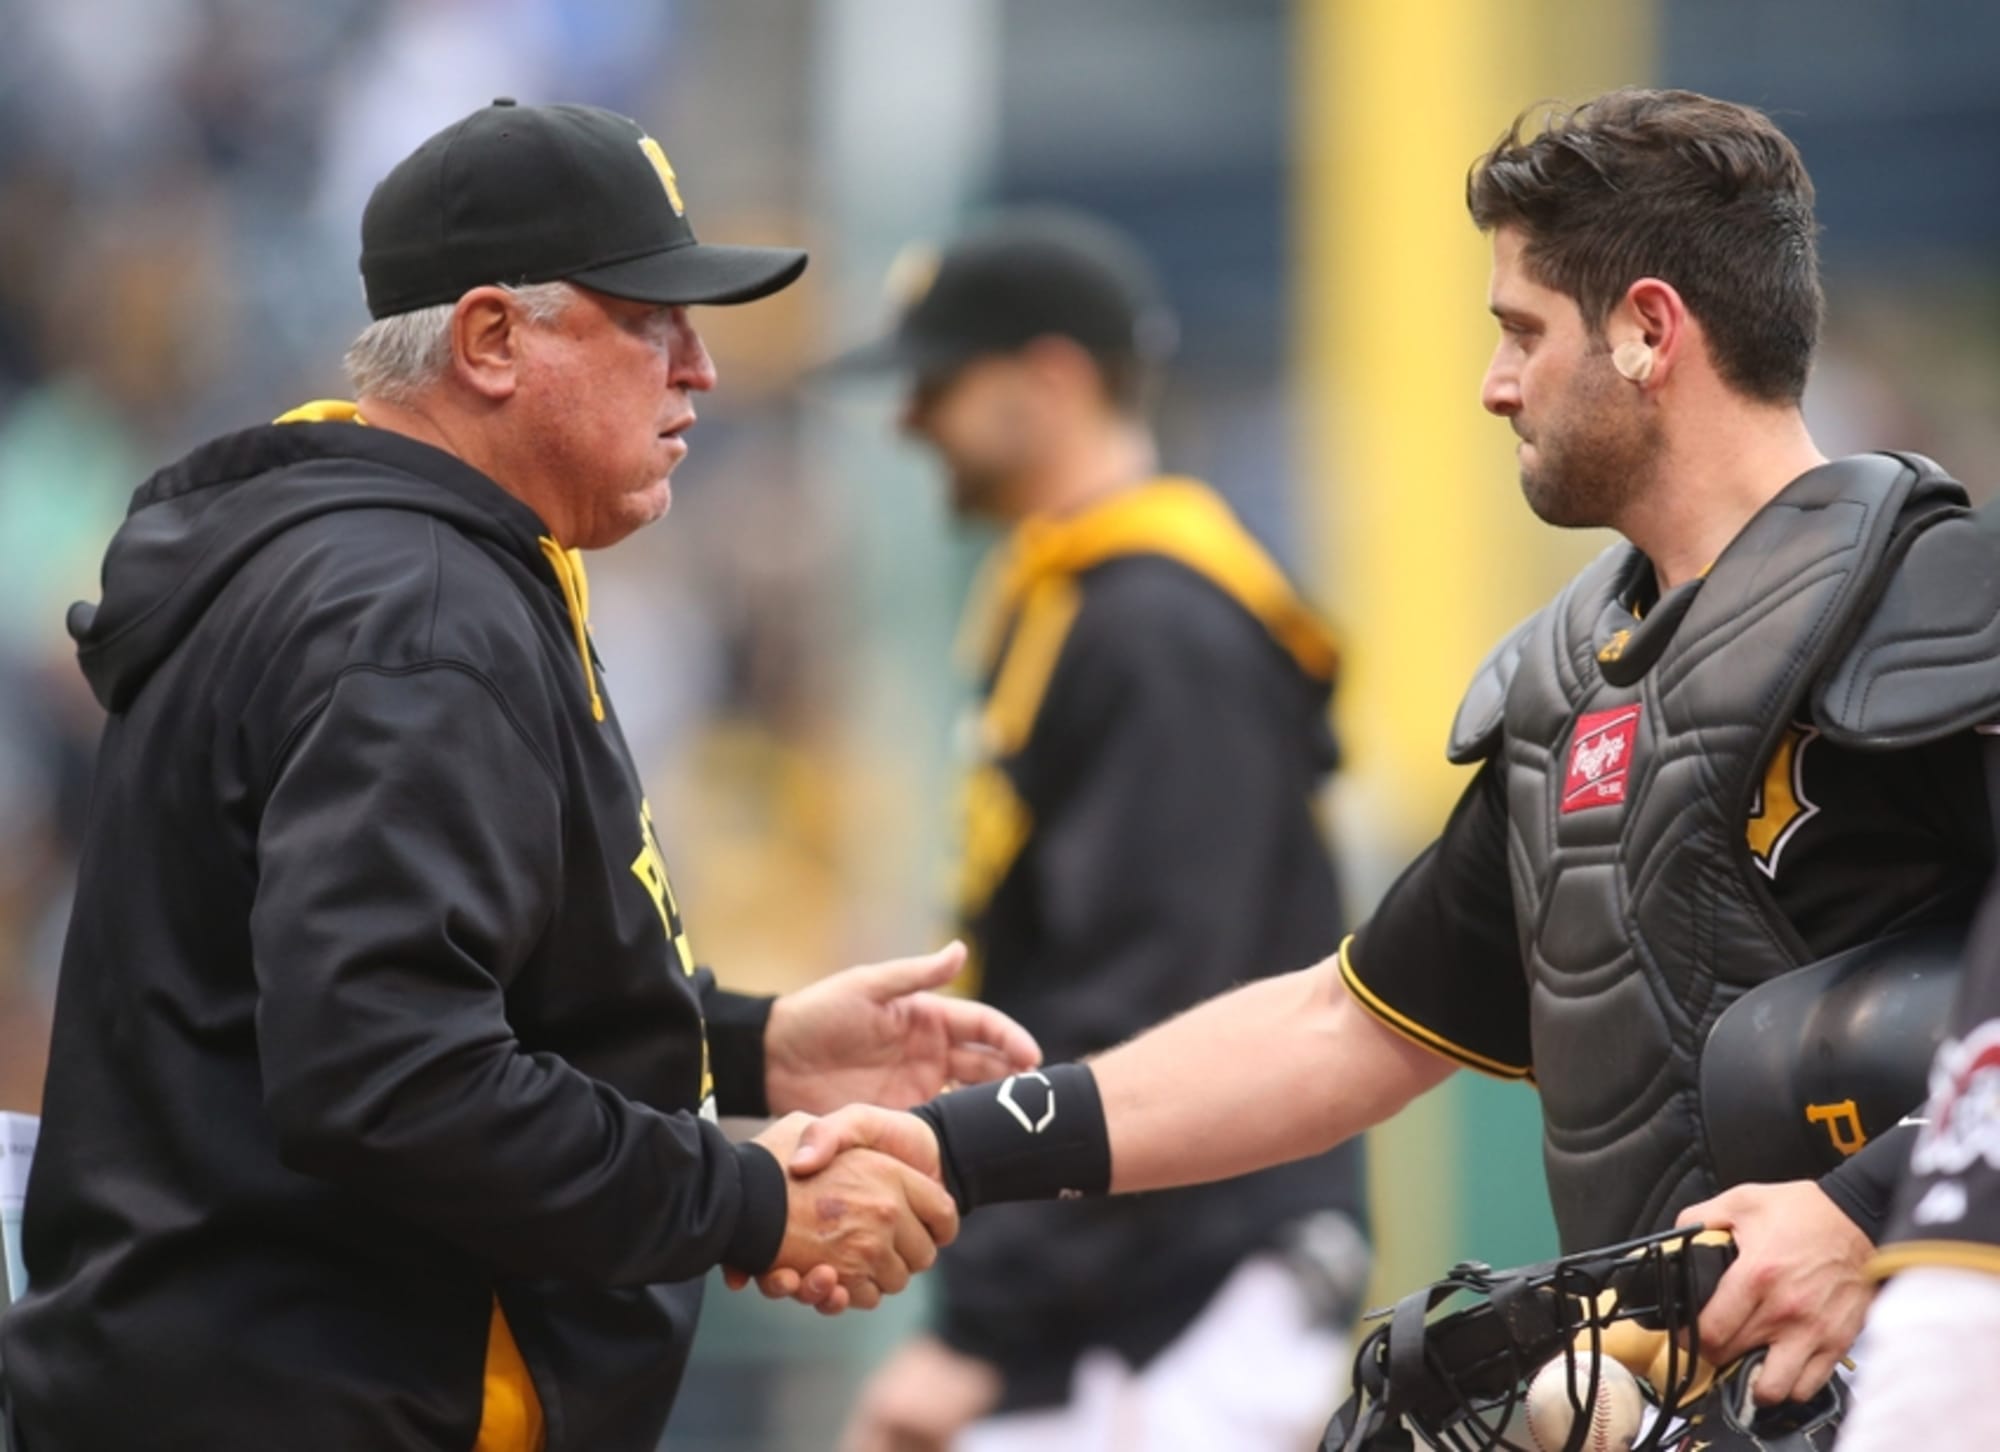 New York Yankees trade catcher Francisco Cervelli to Pittsburgh